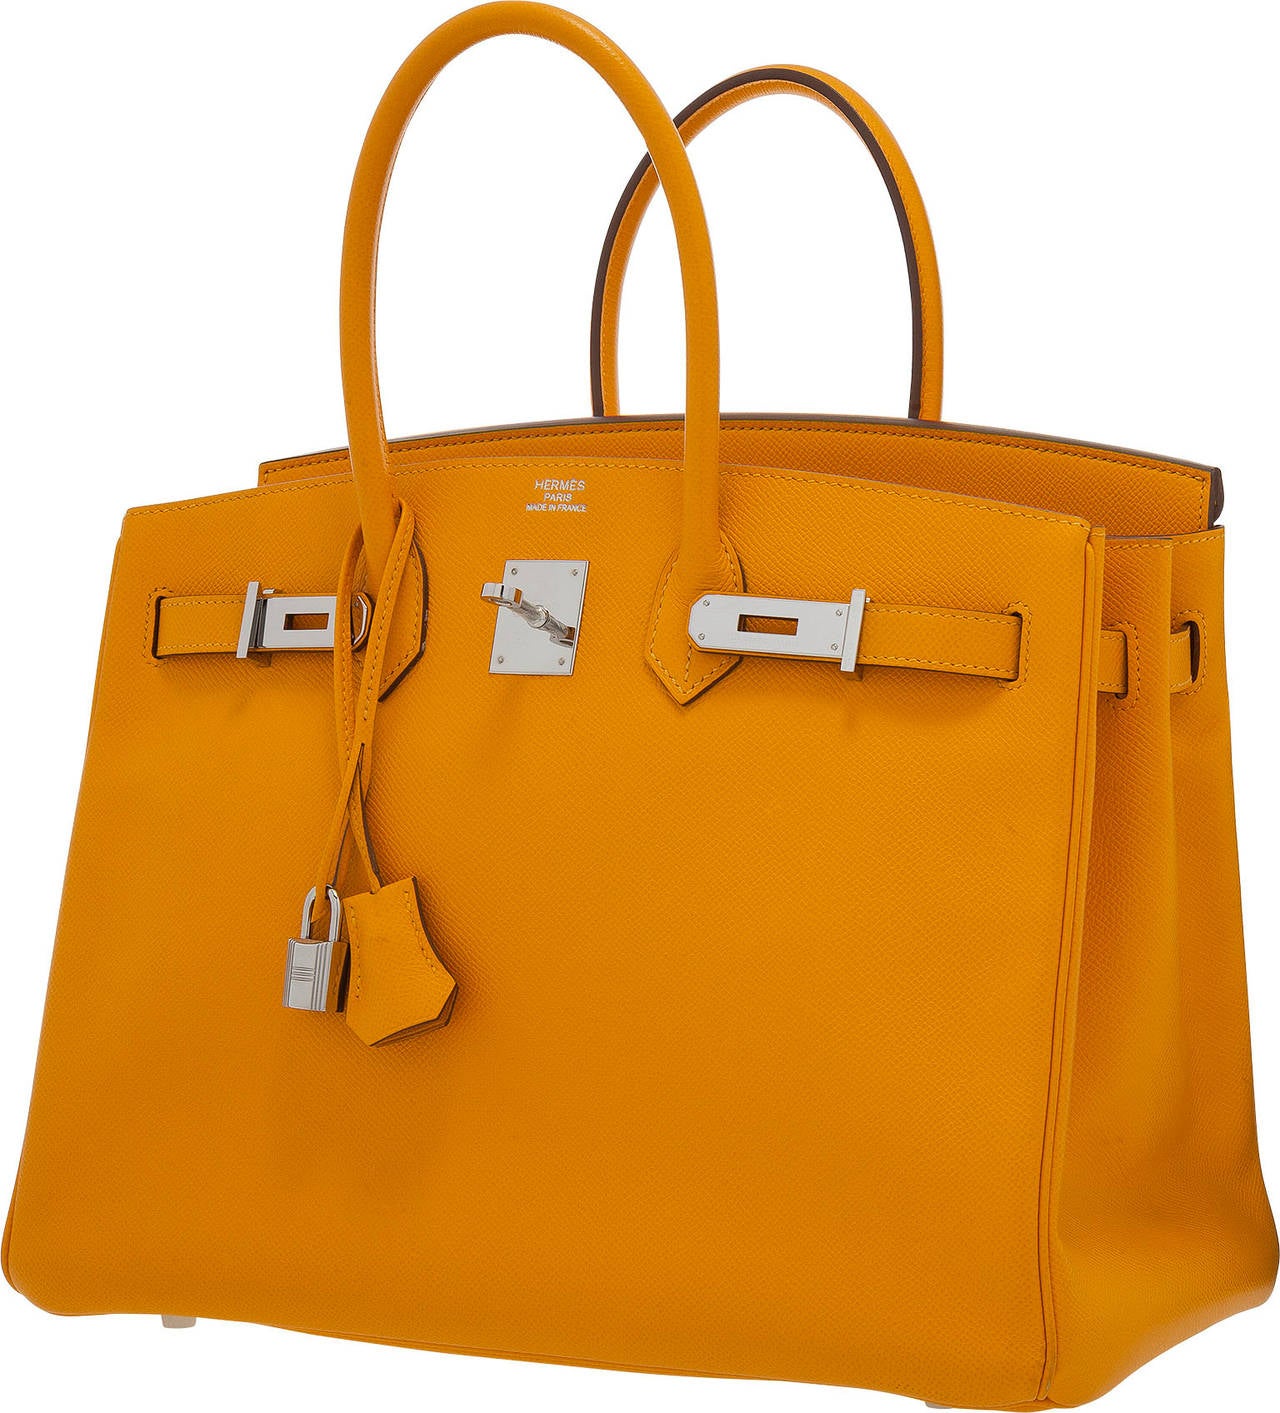 The Birkin has been a long standing icon of Hermes, due to their functionality and lasting value.  Hermes does bright and colorful colors so well, like this Jaune d'Or Birkin. This bag features Palladium Hardware, two rolled leather handles, a lock,